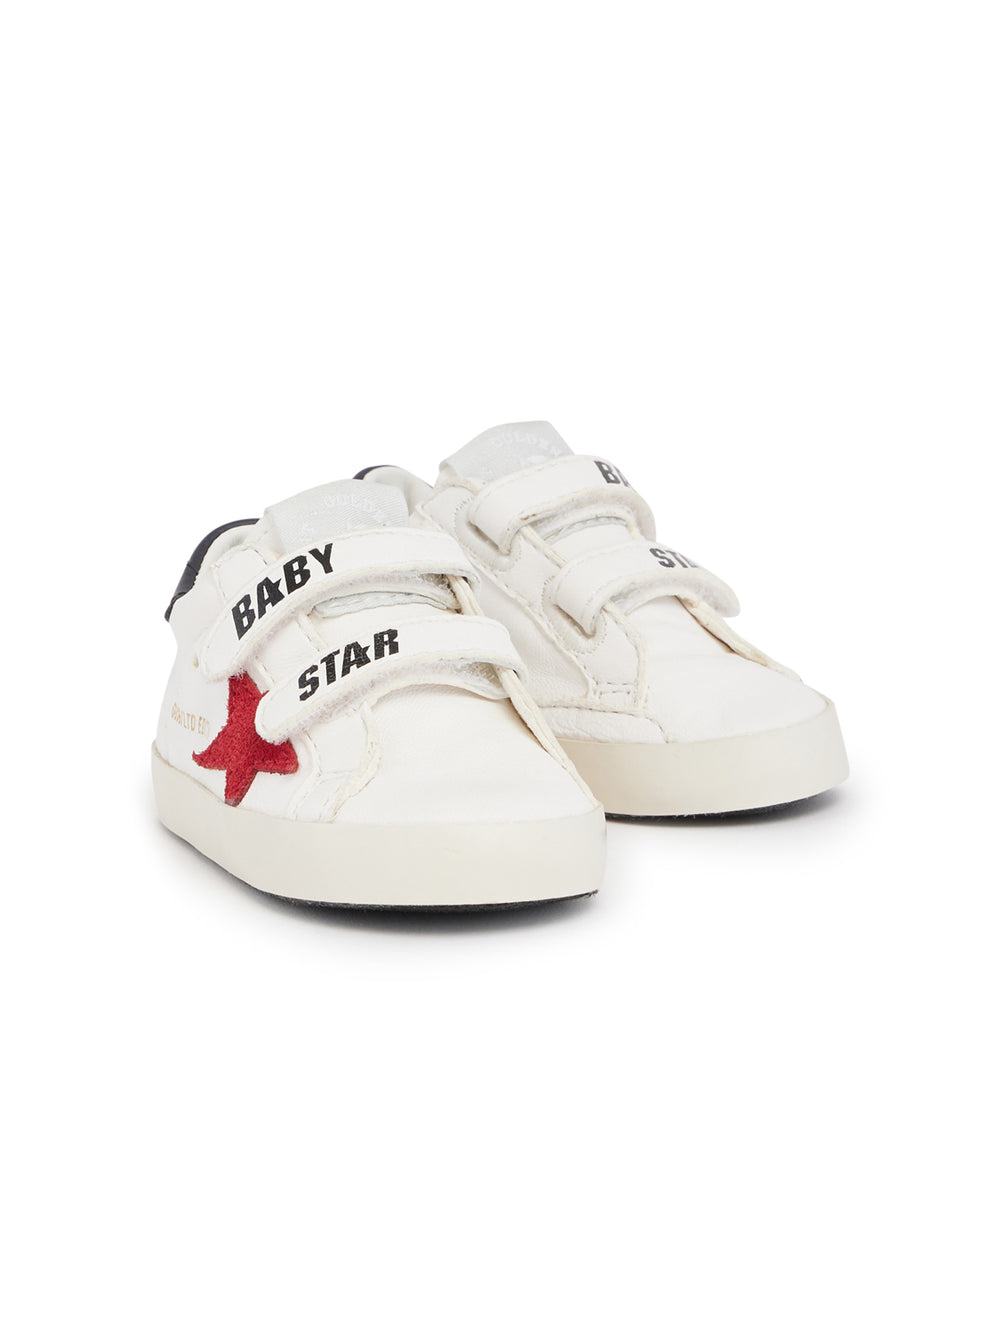 Bonpoint x Golden Goose Leather Sneakers red